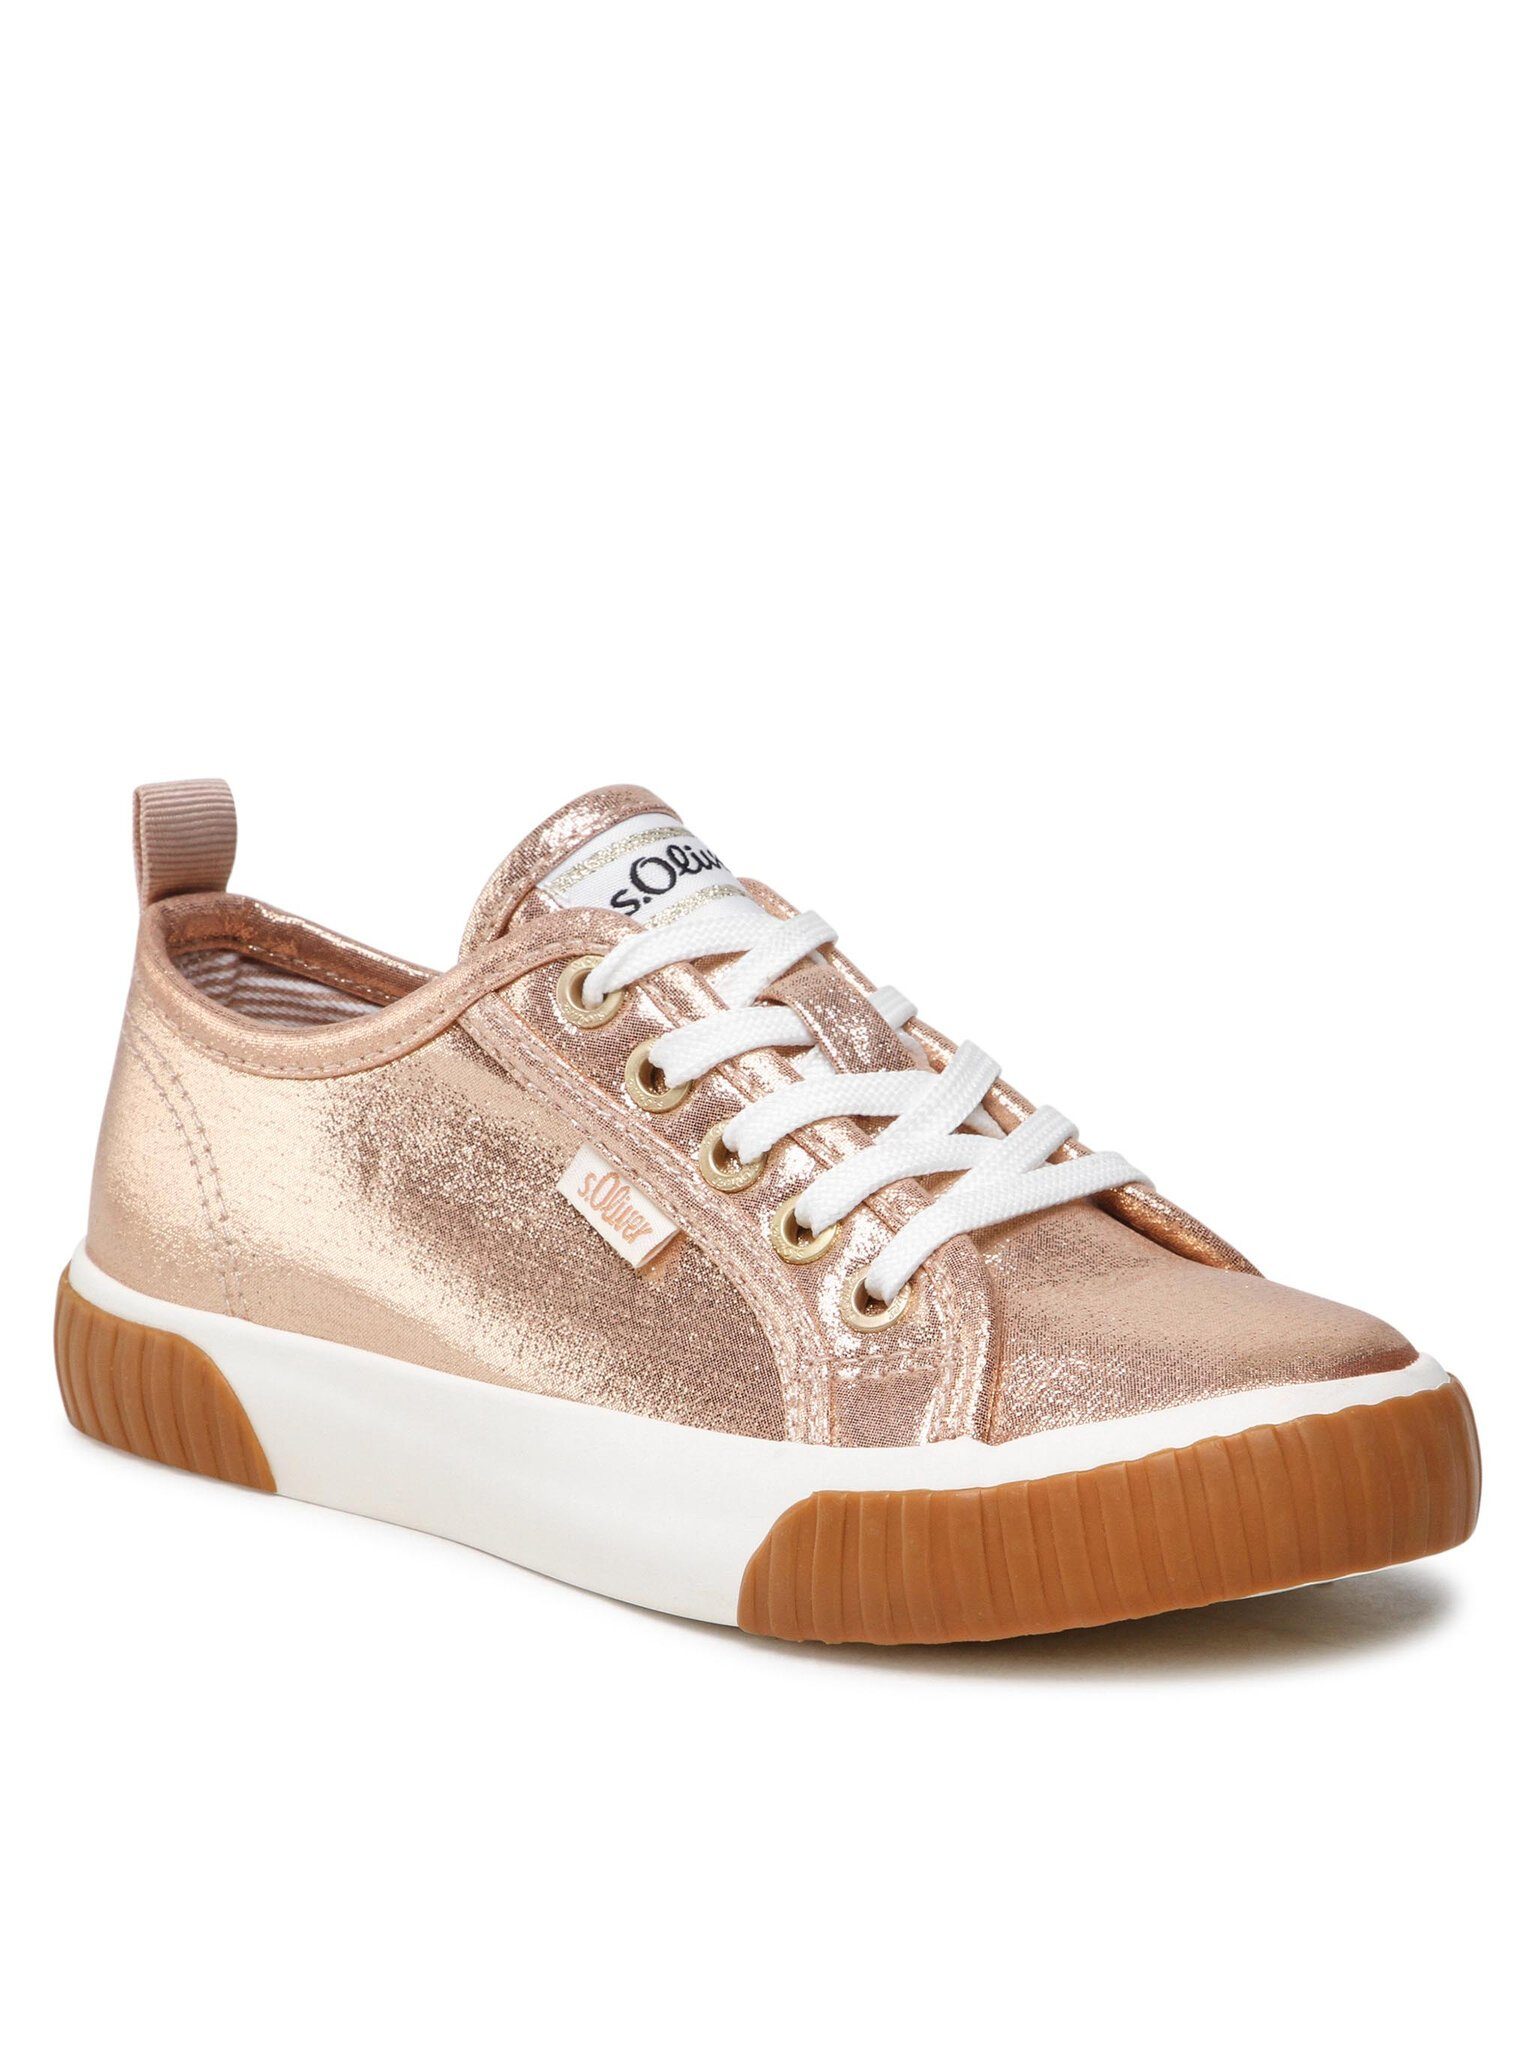 s.Oliver Sneakers 5-43212-28 Pink Glitter 511 Sneaker